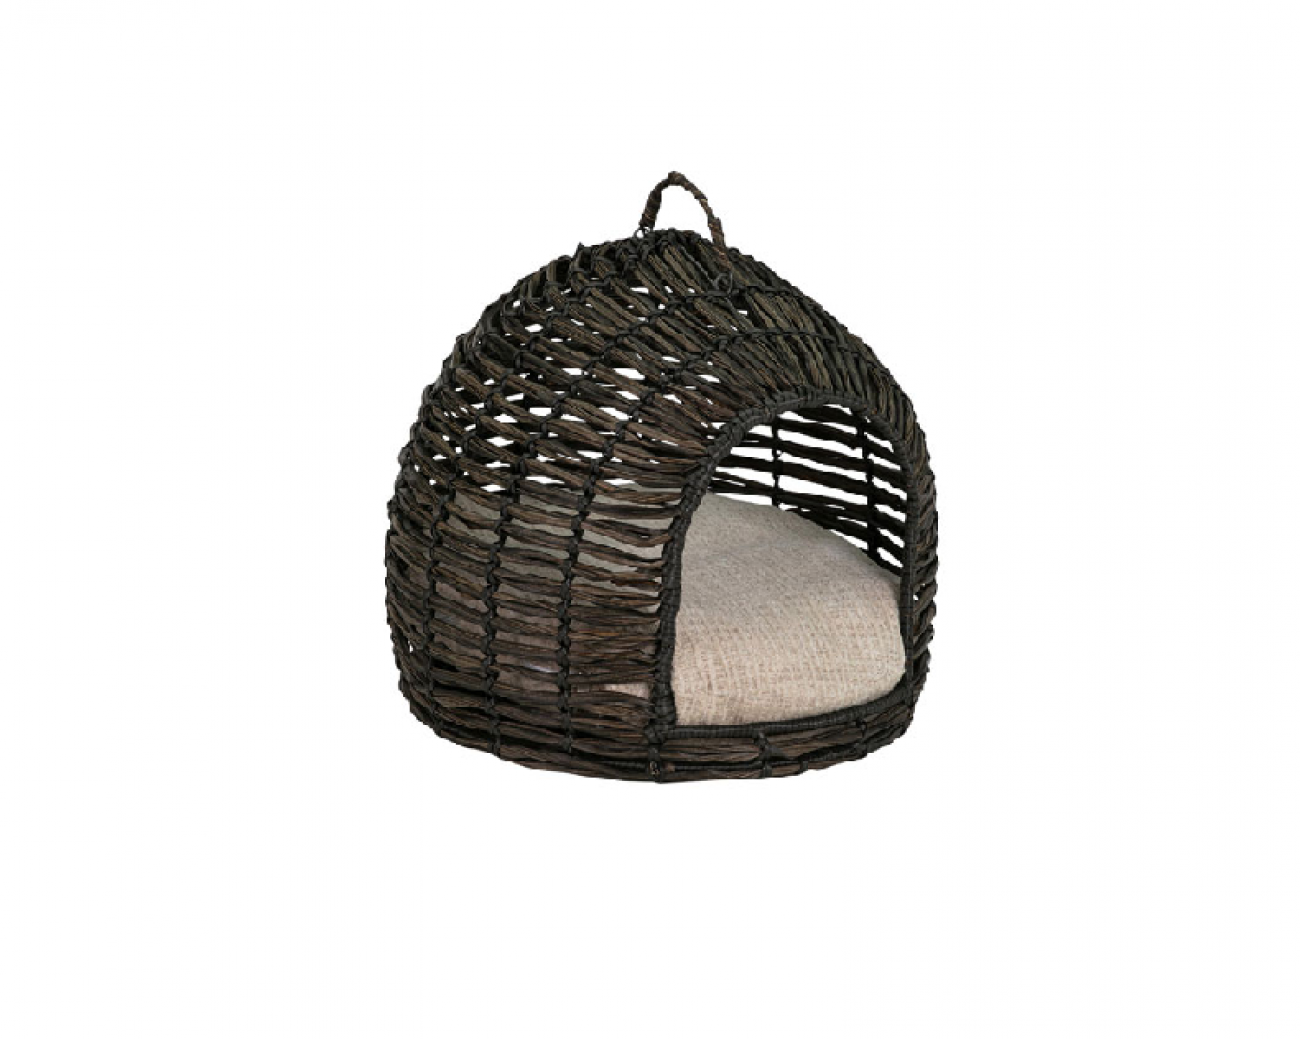 Bowser & Meowser Resin Wicker Hideaway Pet Bed -with Handle- Brown 